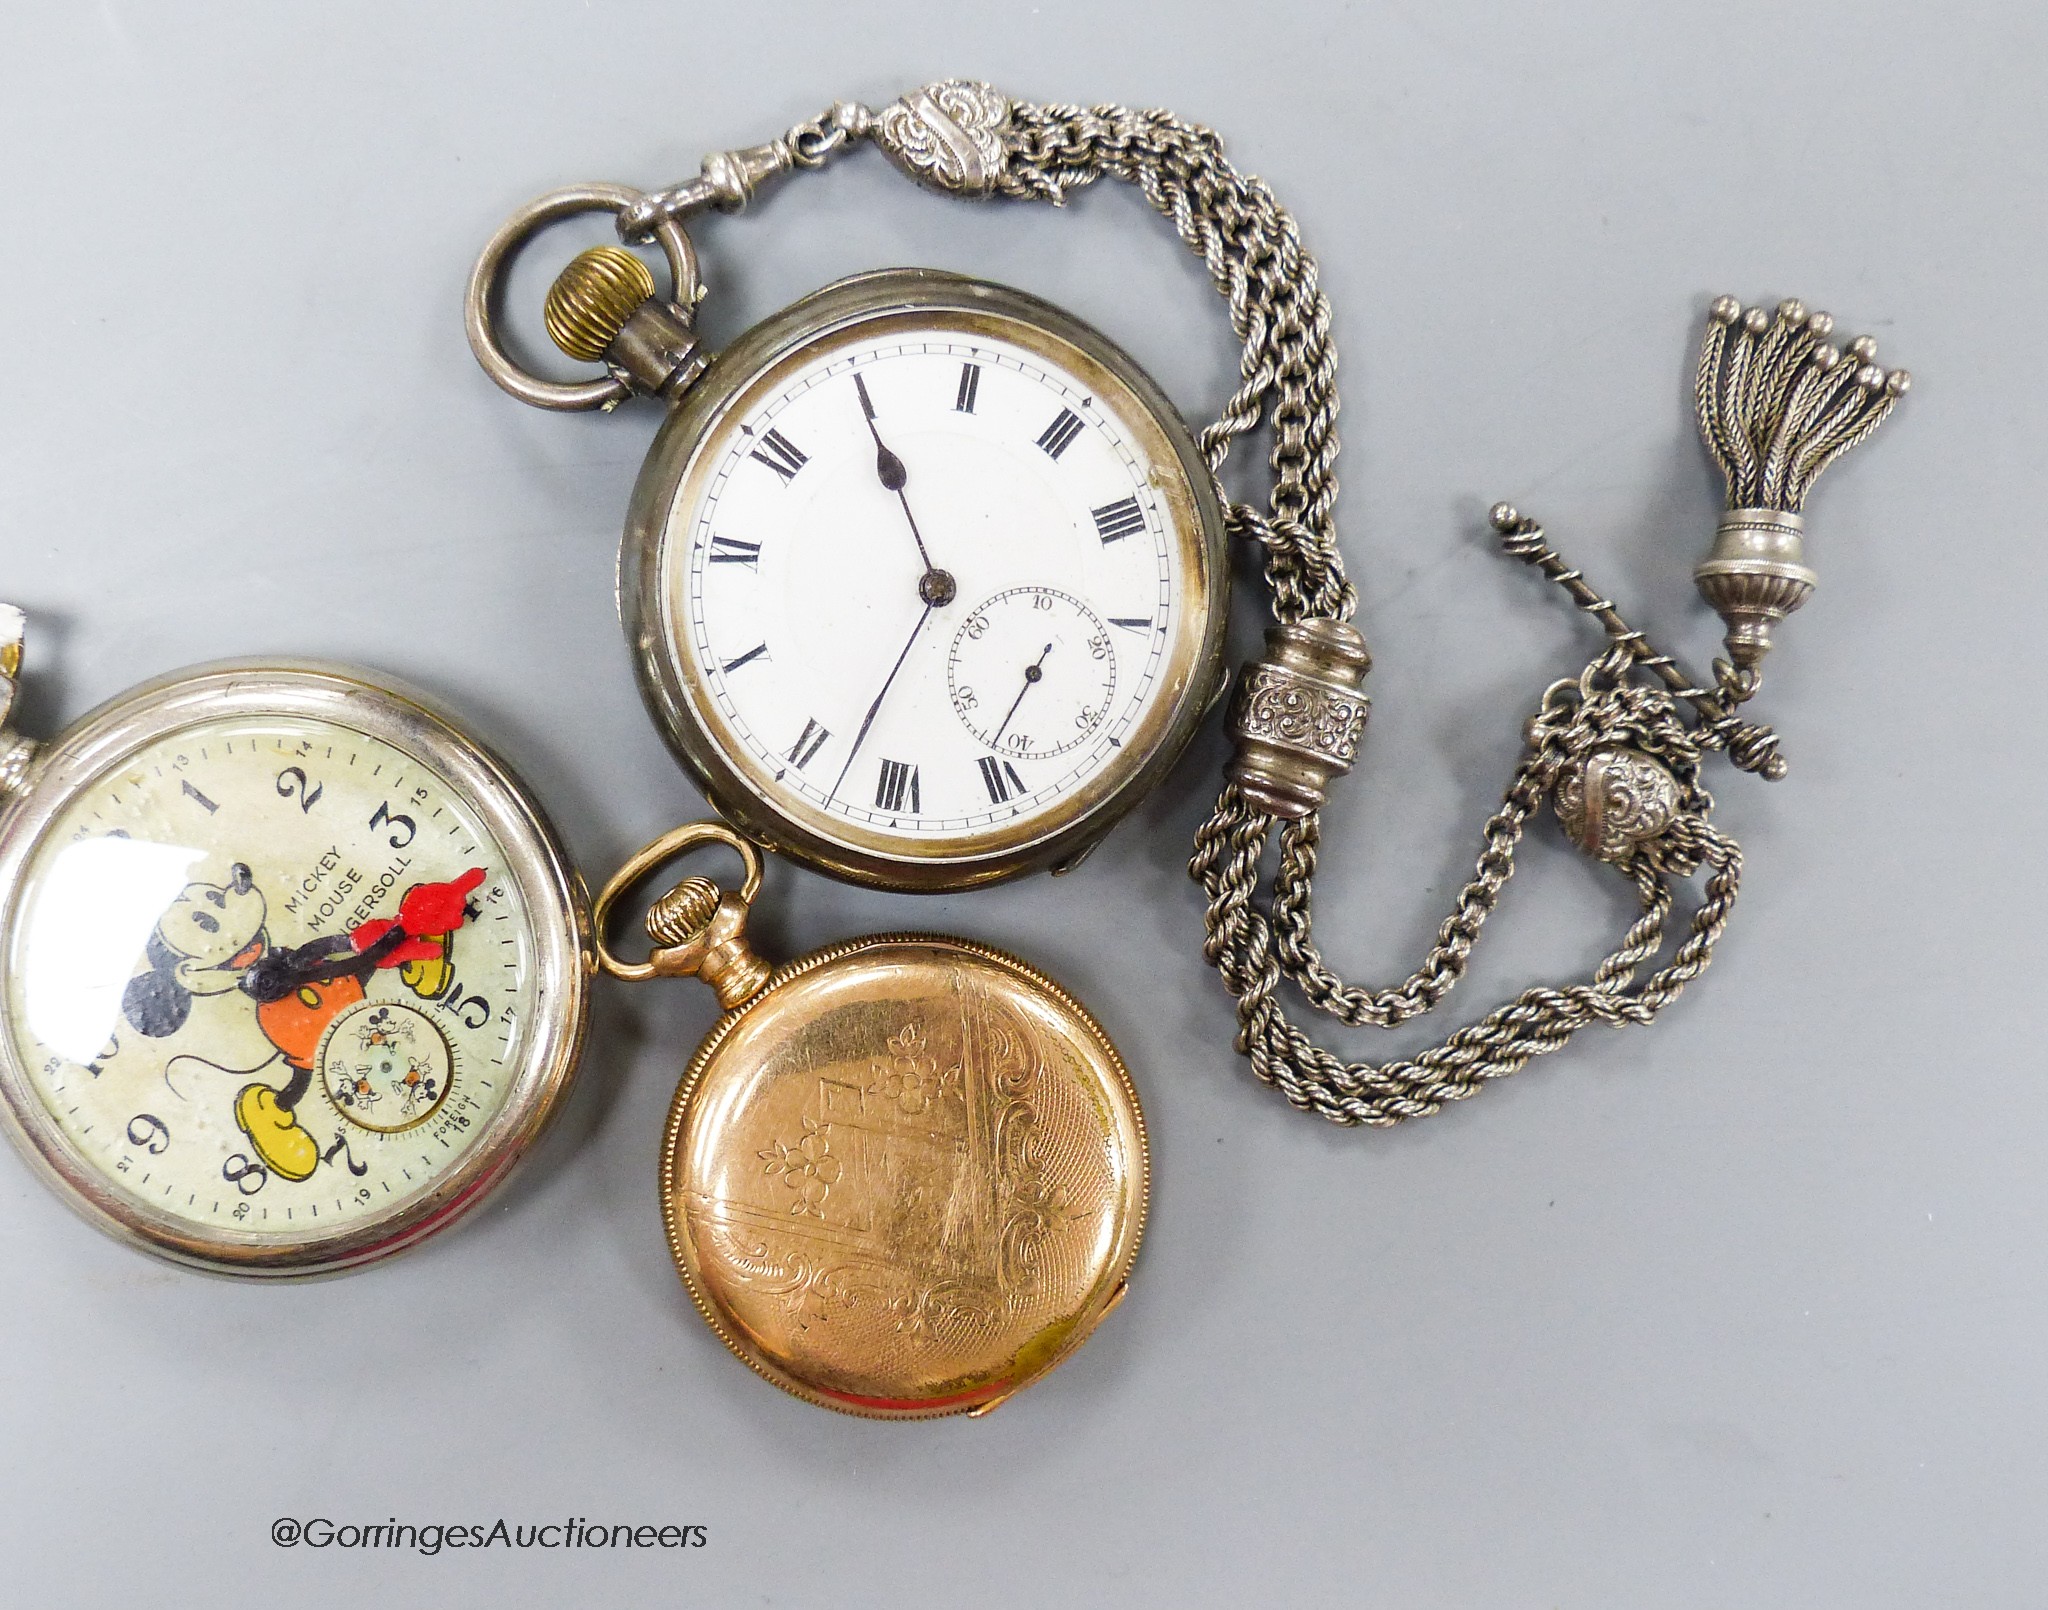 An Ingersoll Mickey Mouse pocket watch, a silver pocket watch on white metal albertina and a gold plated pocket watch.